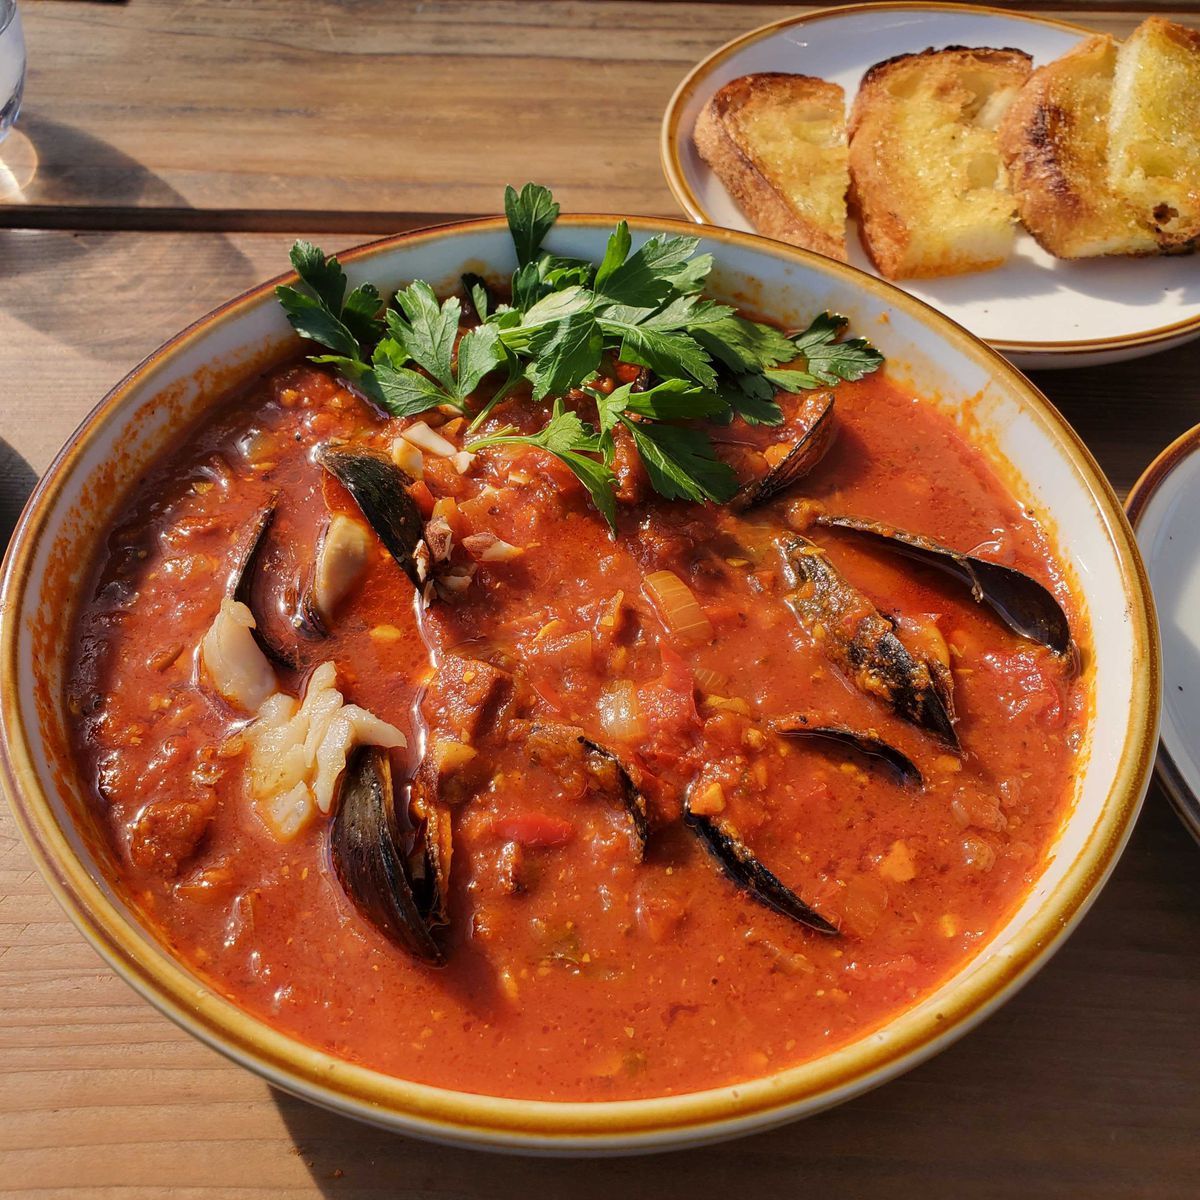 A tomato-based seafood stew in a bowl from Sailing Goat in Richmond, California.